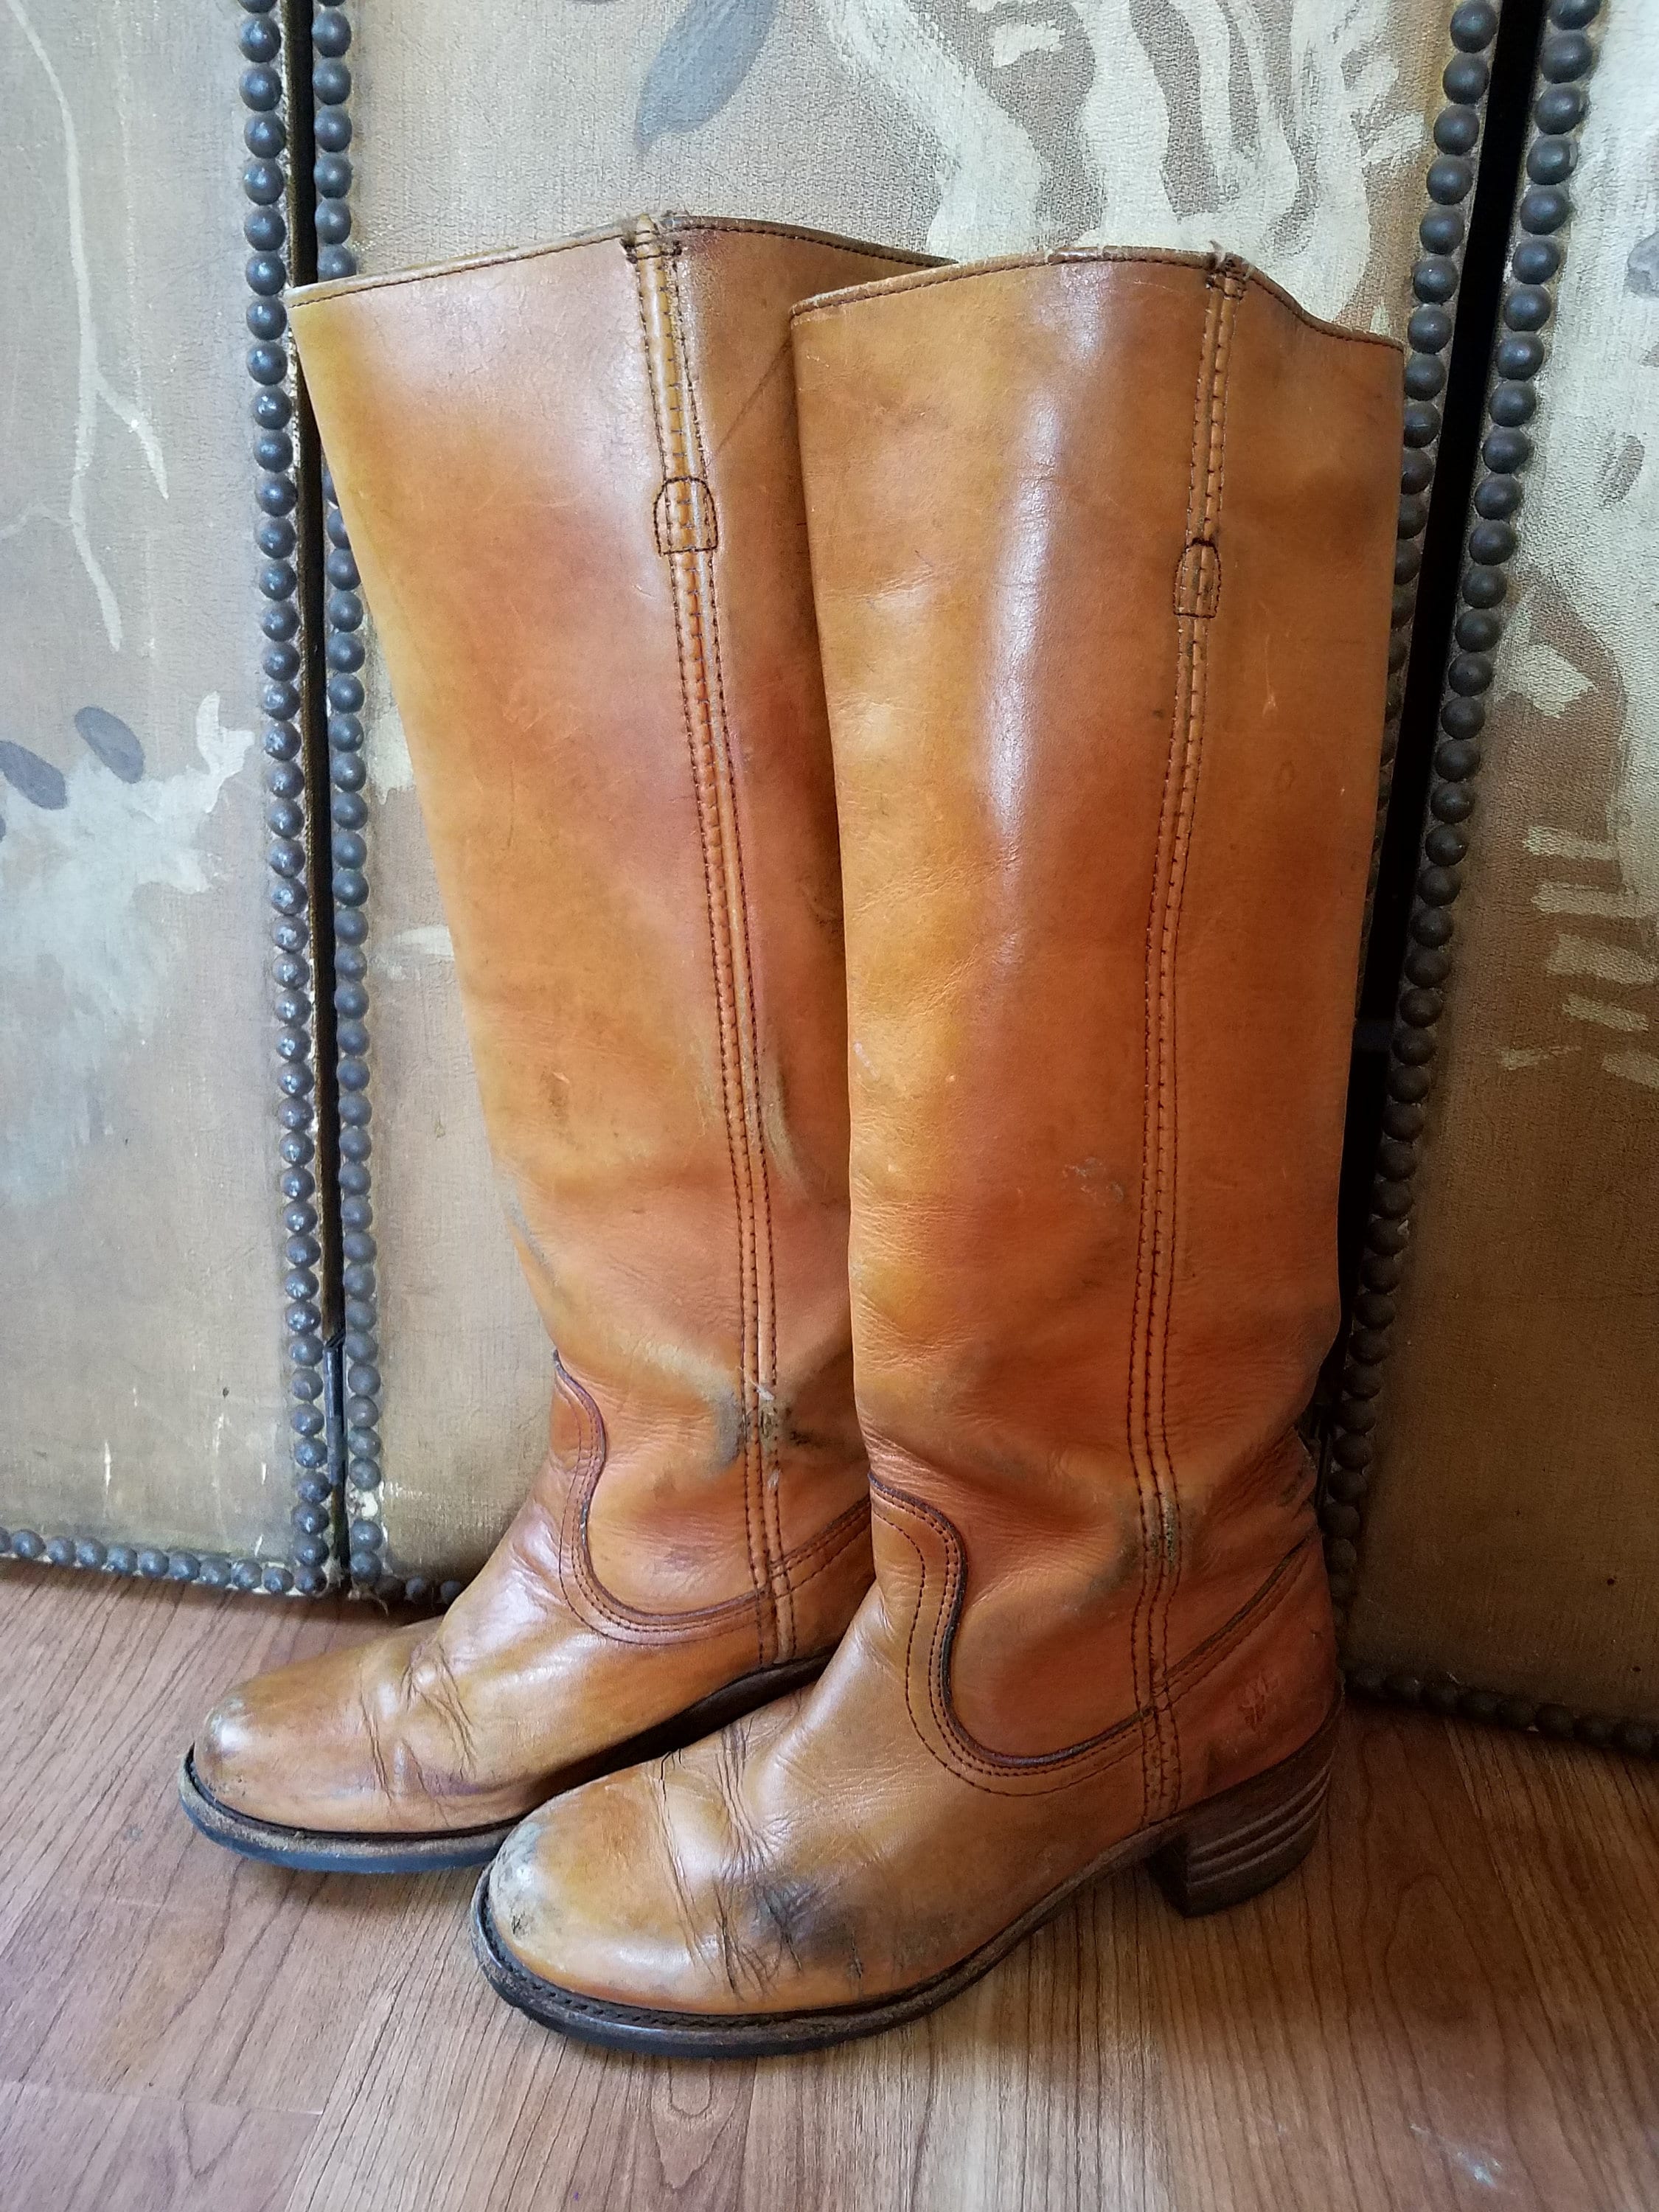 70s Tan Leather Frye Campus Boots Hipster Boots